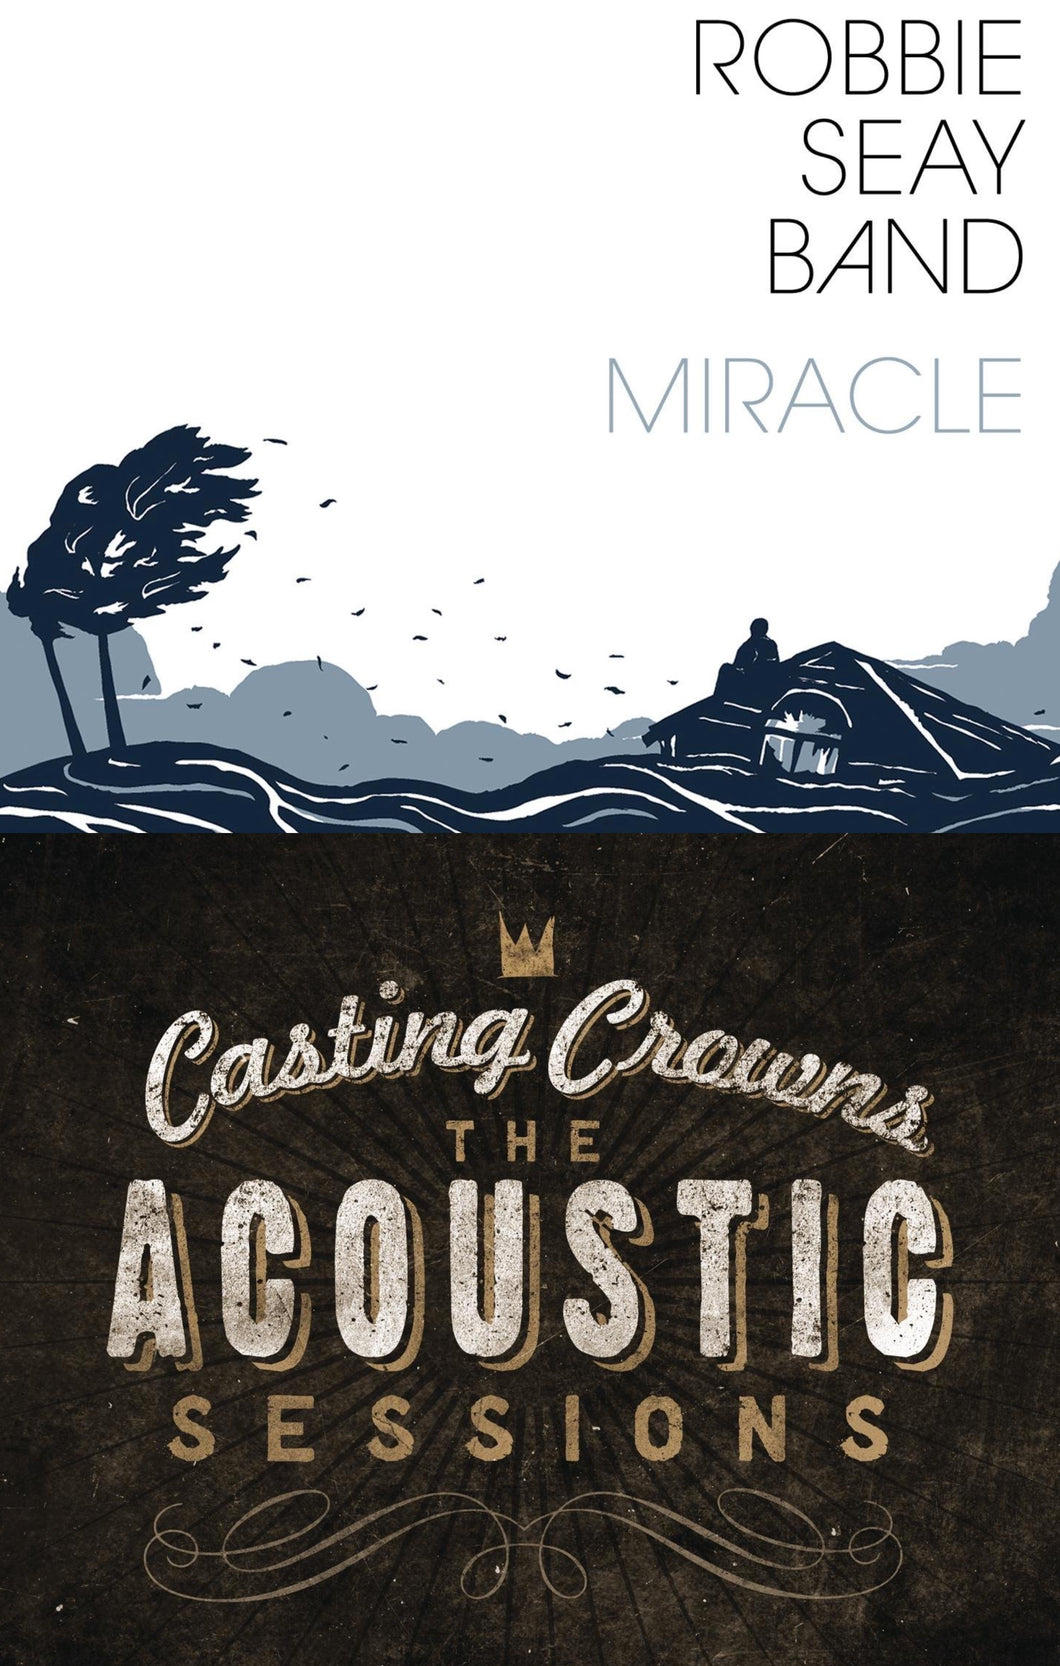 Robbie Seay Band Miracle + Casting Crowns Acoustic Sessions 2CD